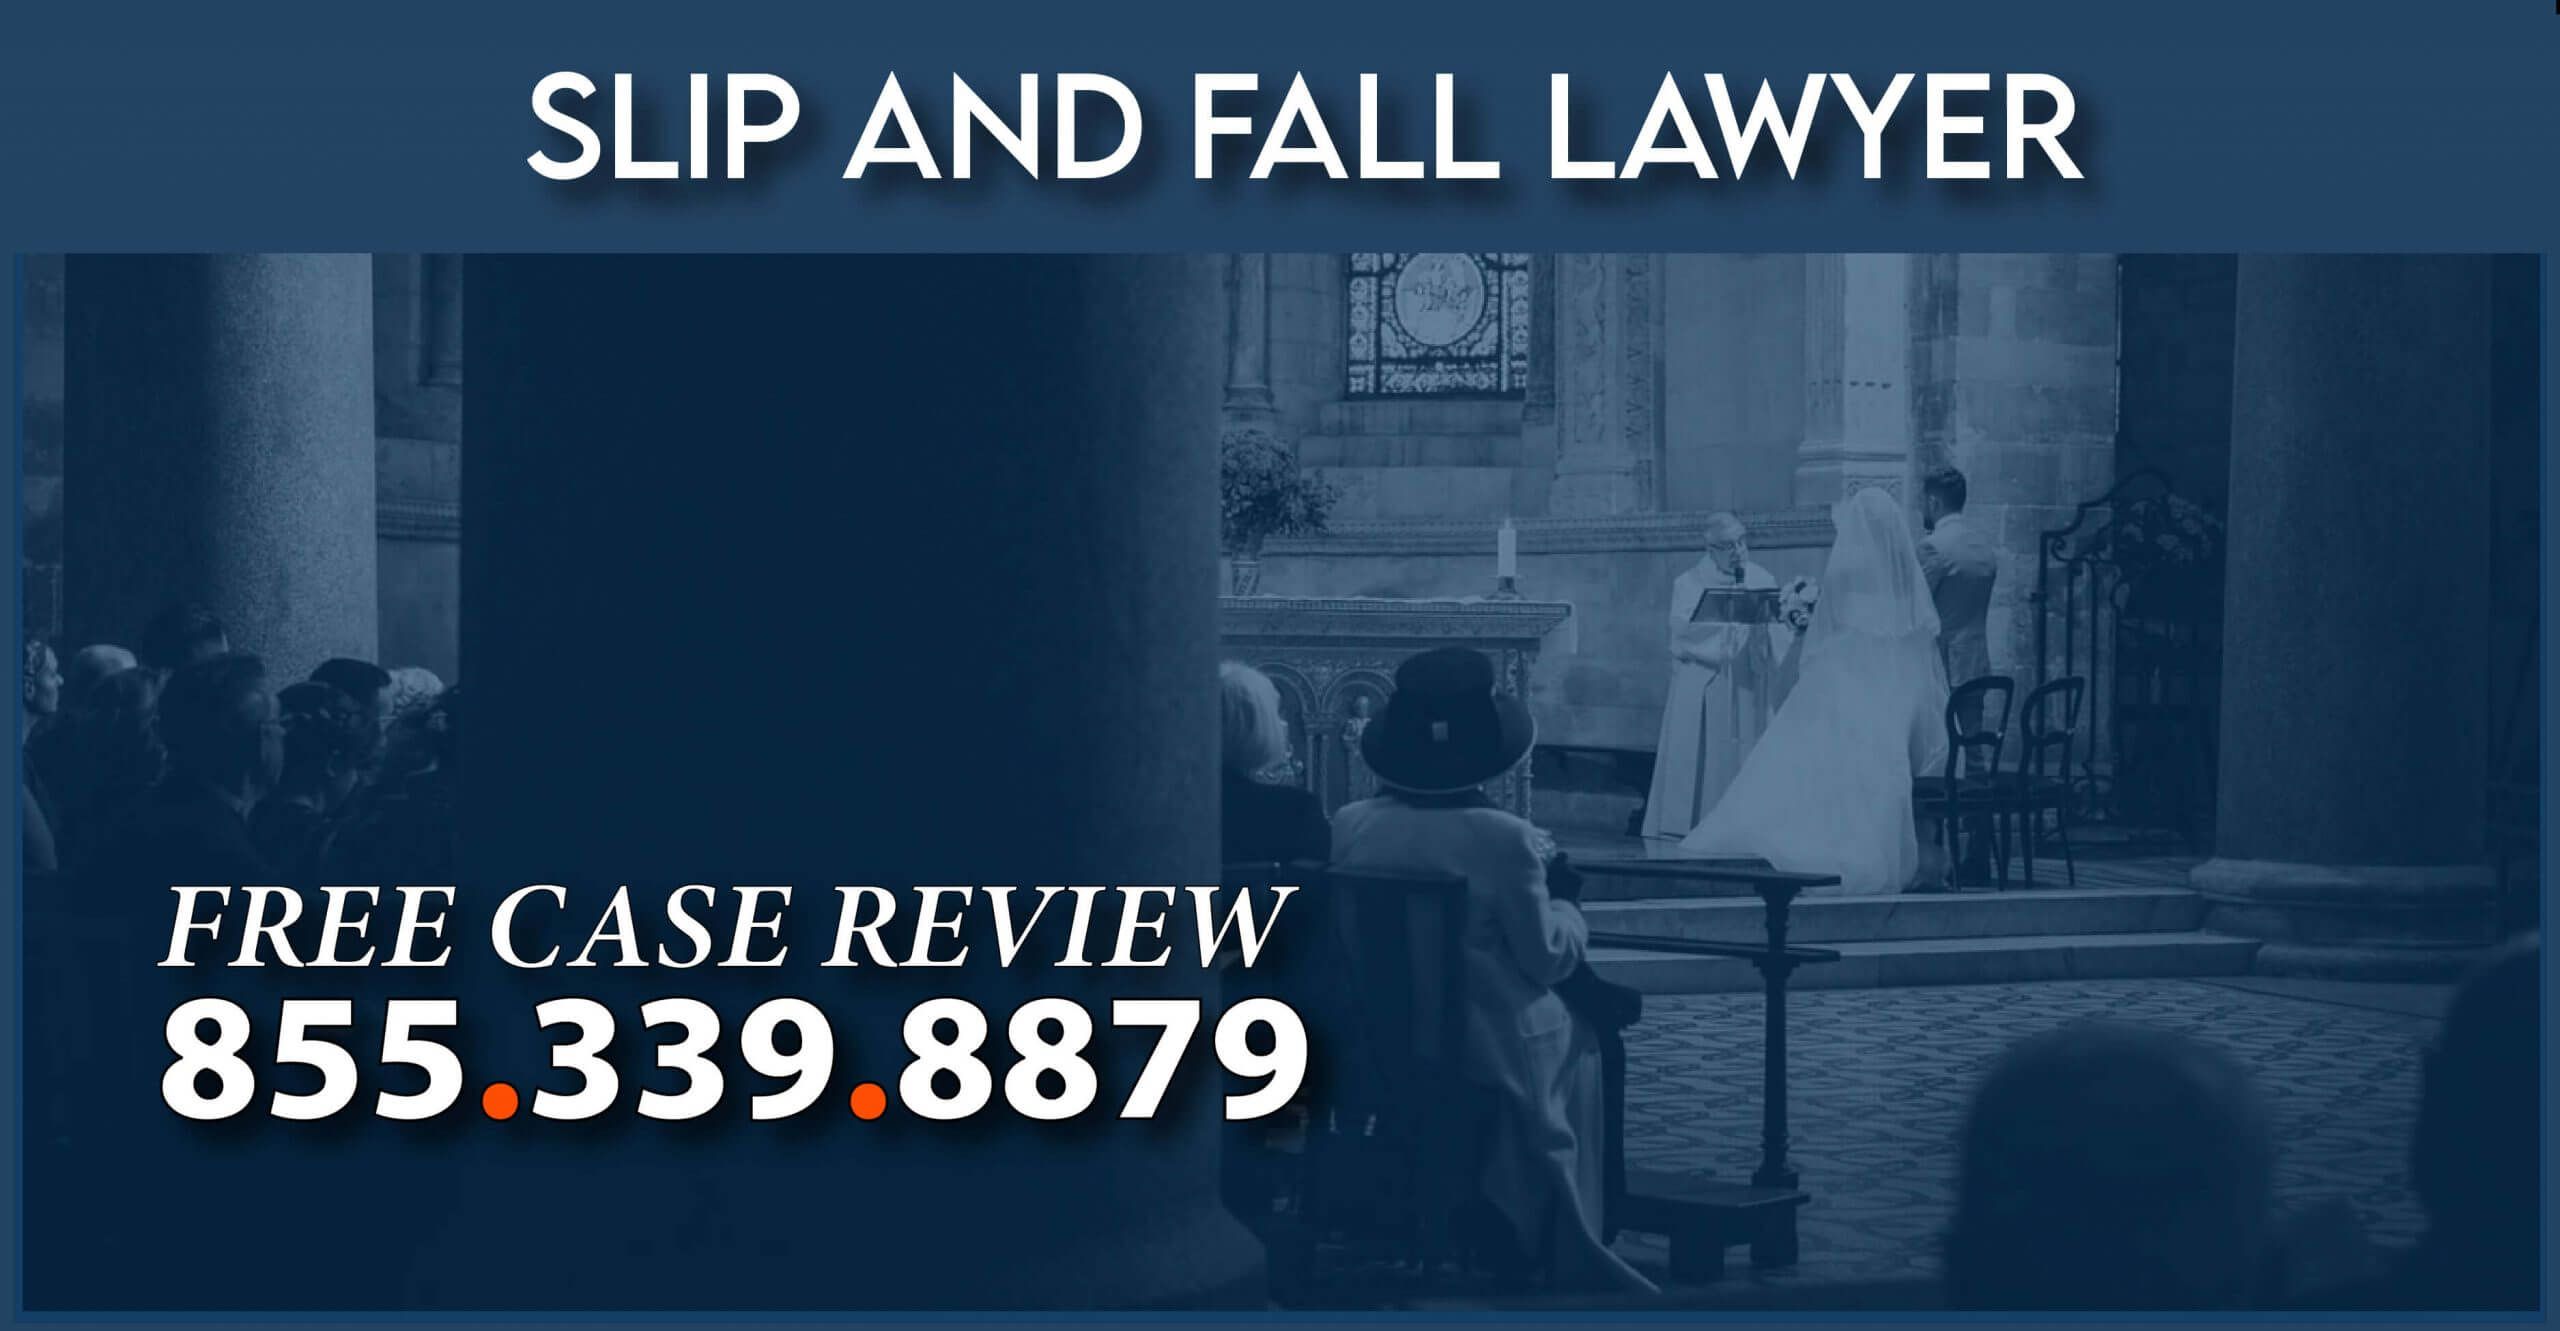 wedding slip and fall premise liability attorney incident accident lawyer